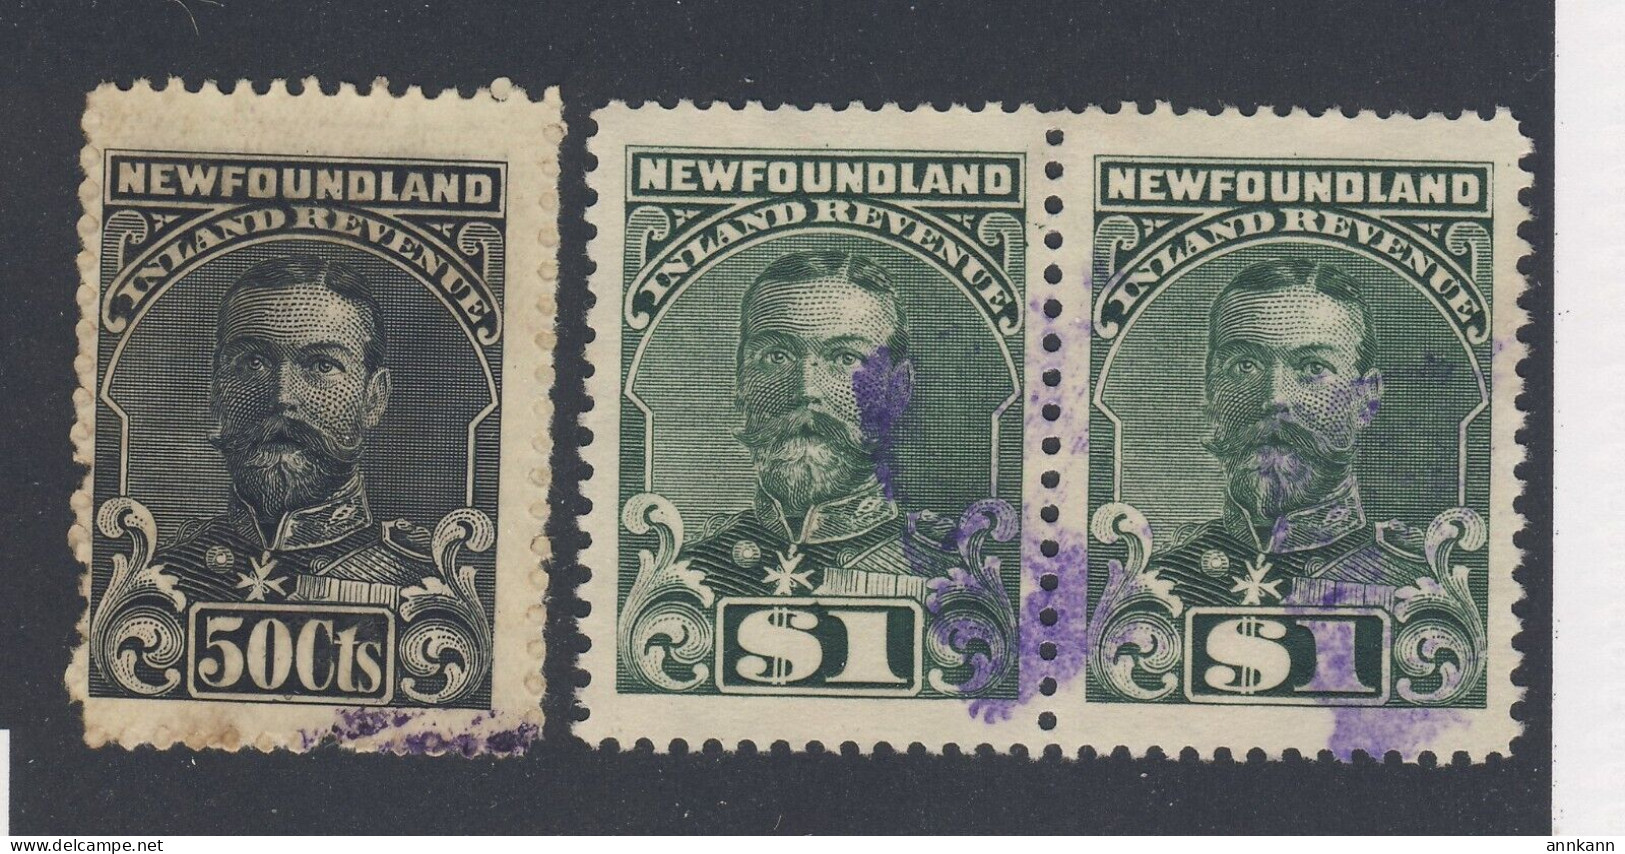 3x Newfoundland George V Revenue Stamps; NFR24-50c, NFR25-Pair $1.00 Guide = $65.00 - Fiscaux